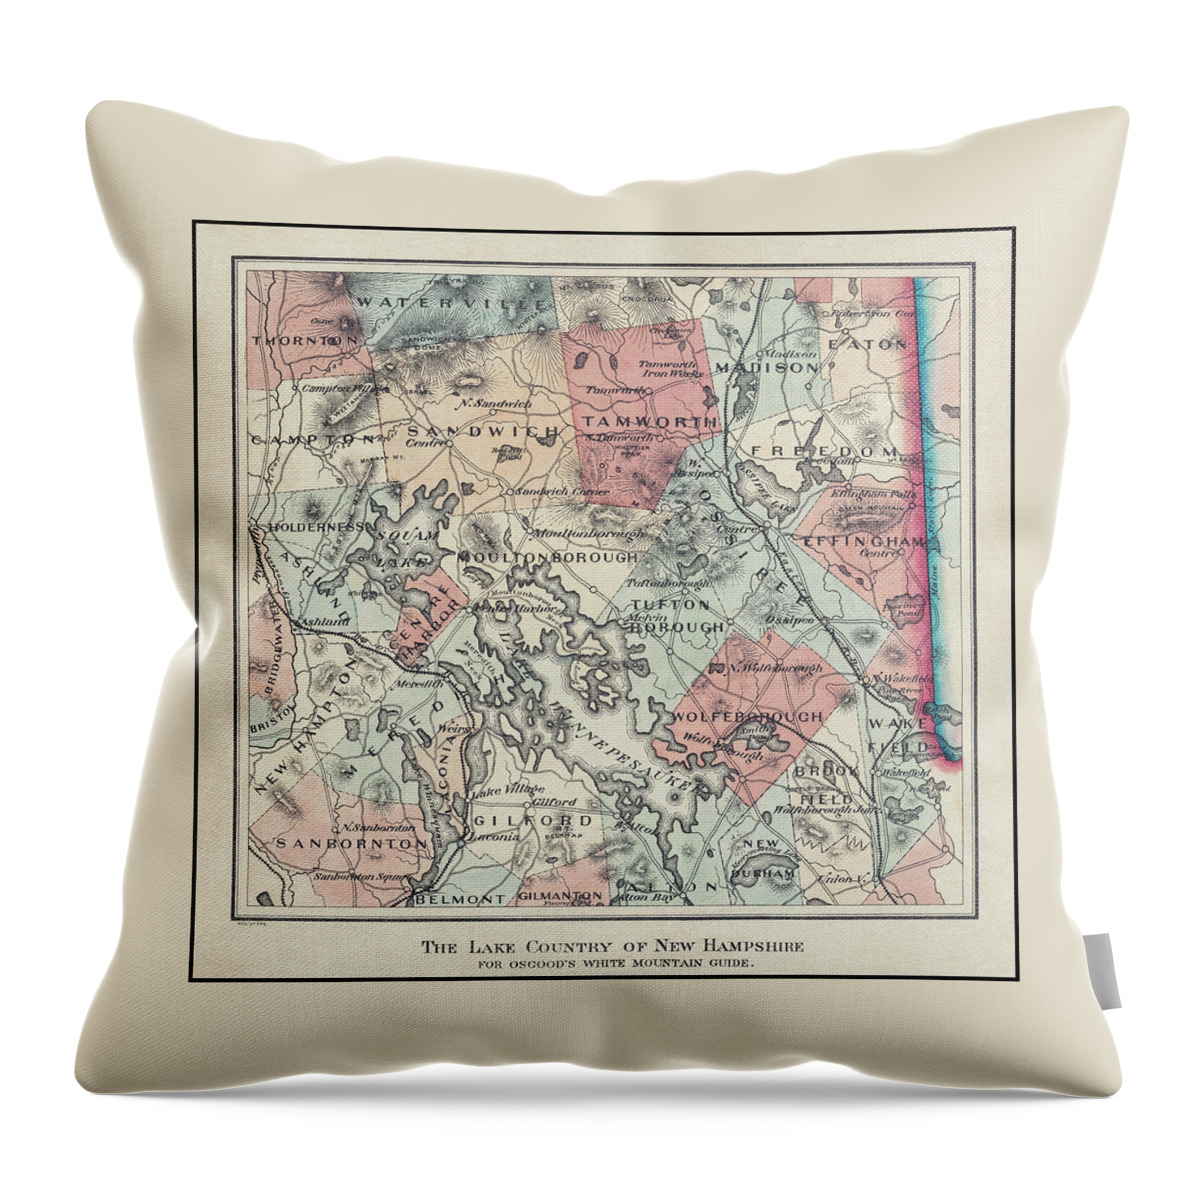 New Hampshire Map Throw Pillow featuring the photograph New Hampshire Lake Country Vintage Map 1870 by Carol Japp